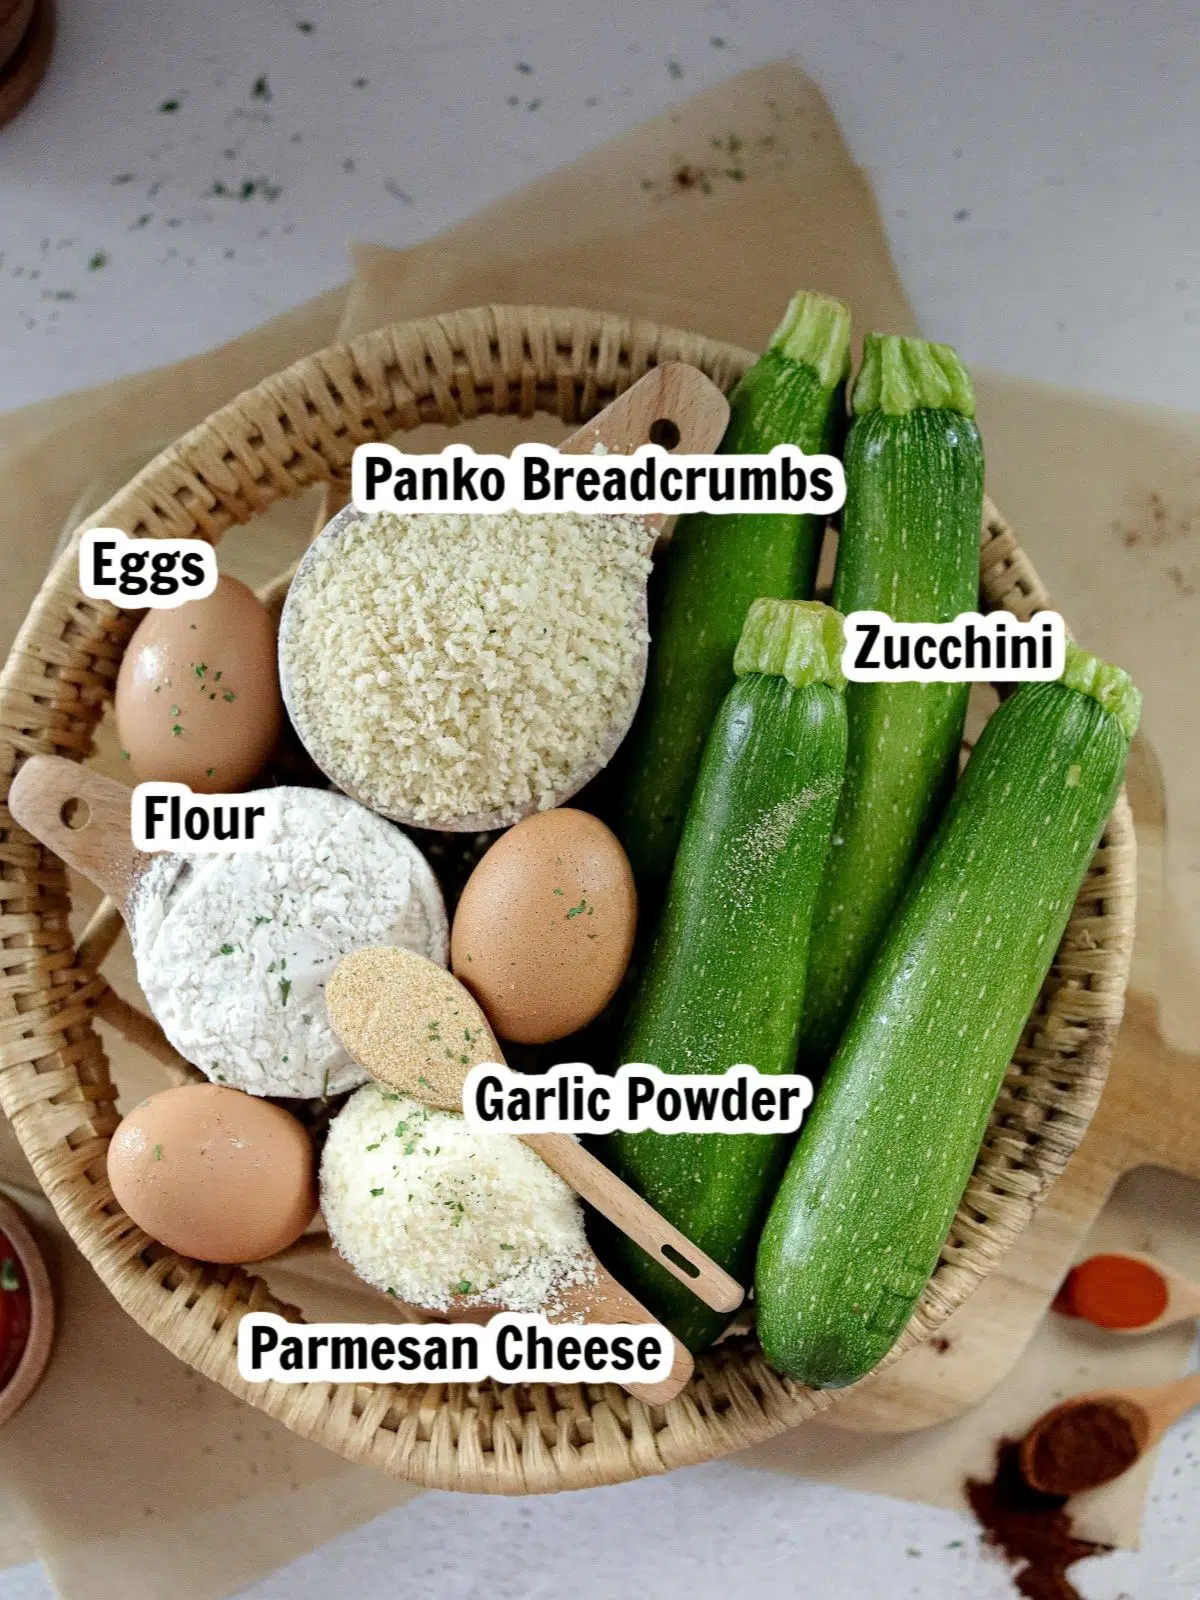 Ingredients for Zucchini Fries